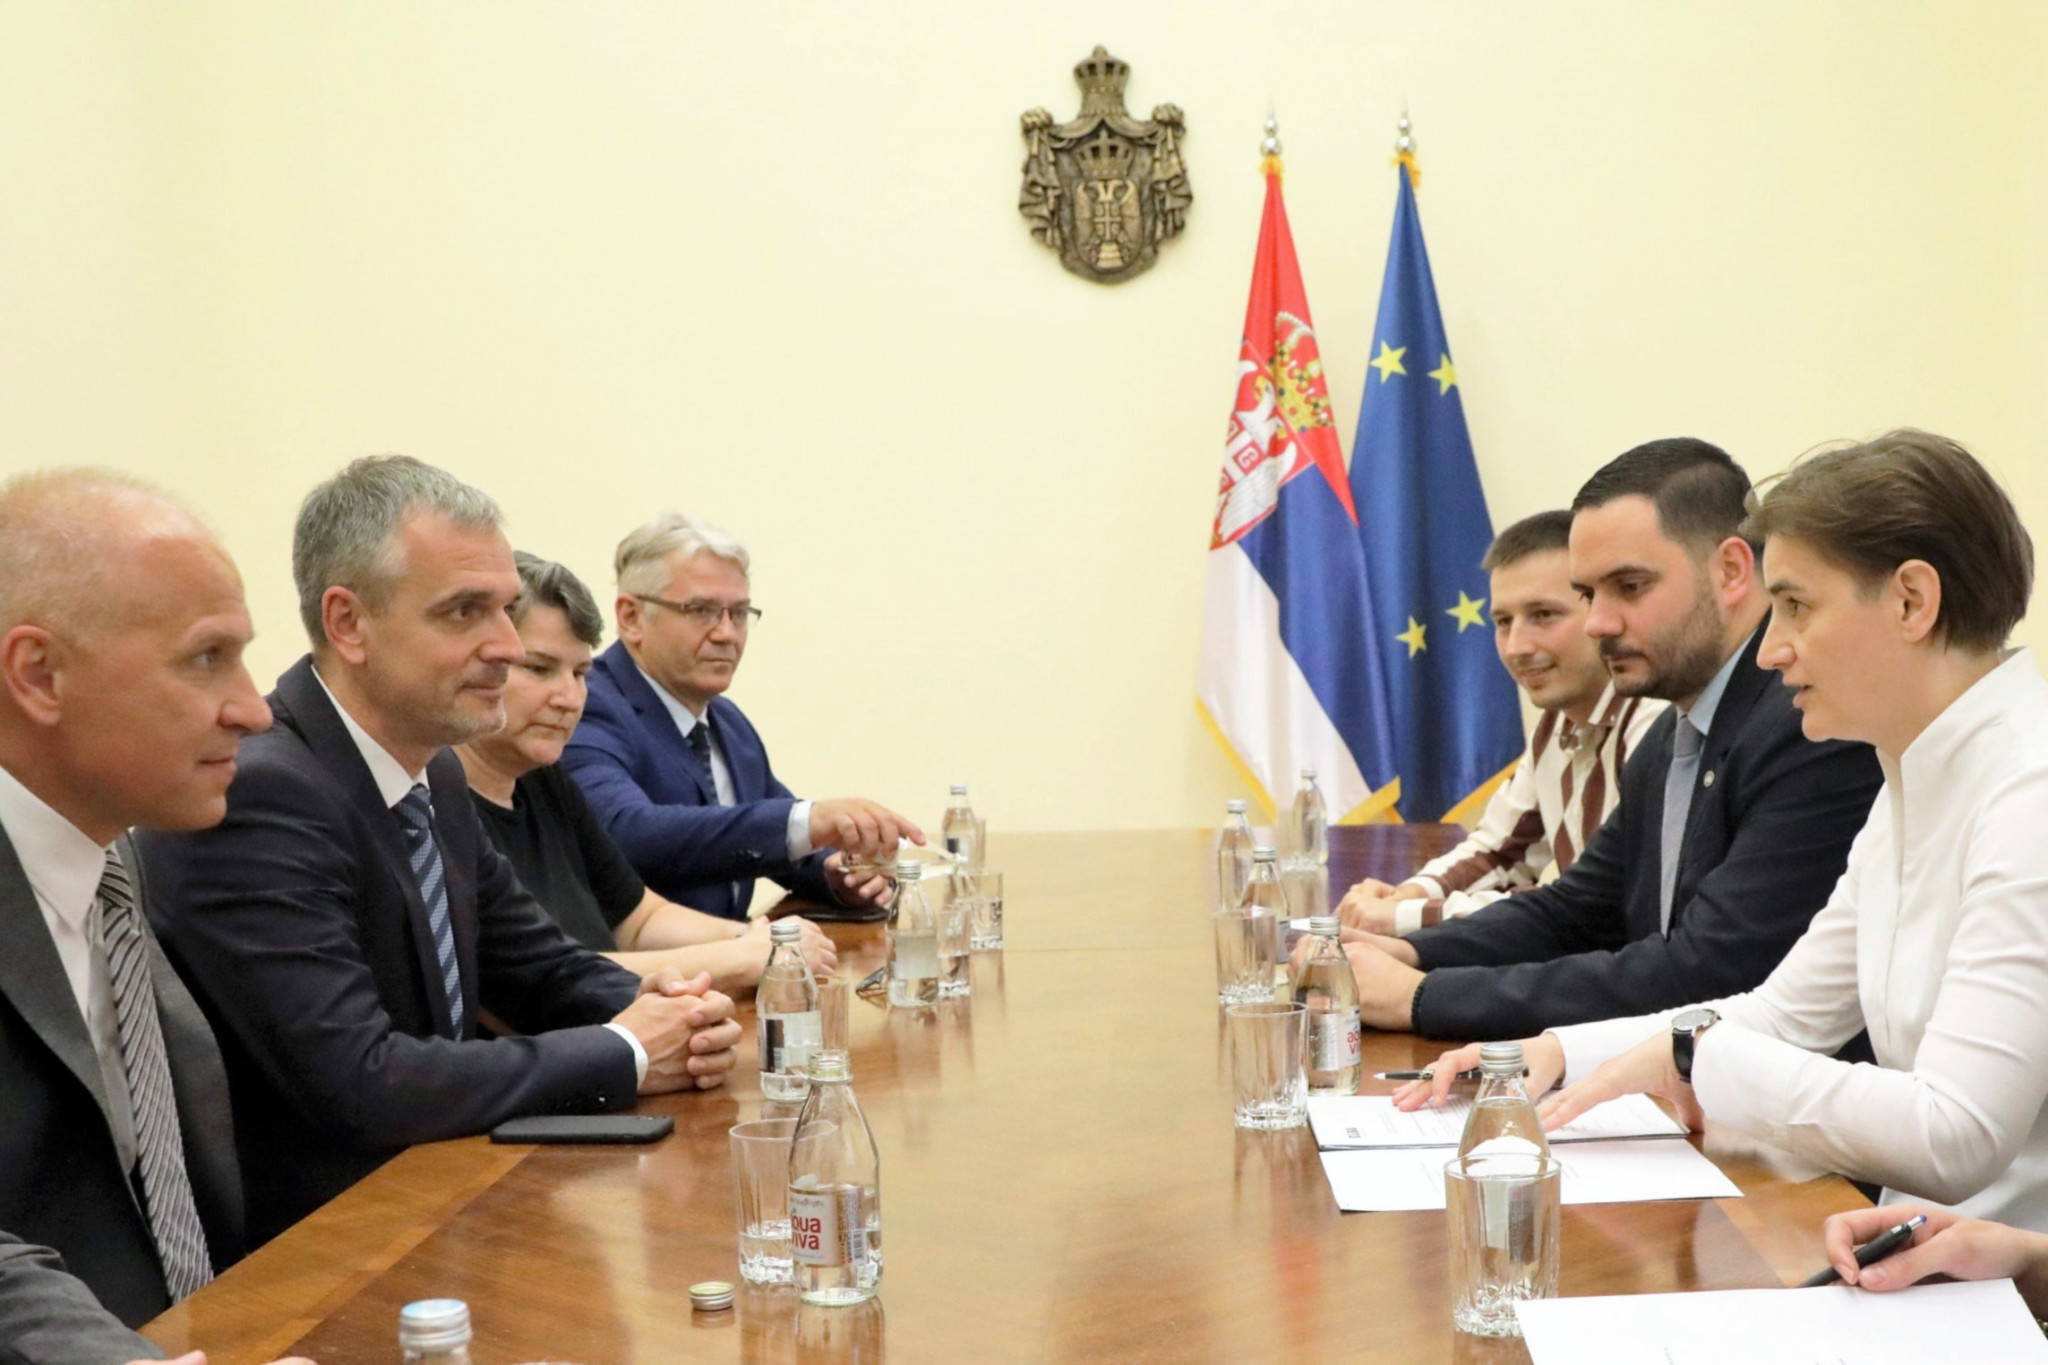 Representatives from the European University Sports Association have met with the Serbian Prime Minister ahead of next year’s European Universities Games in Belgrade ©EUSA